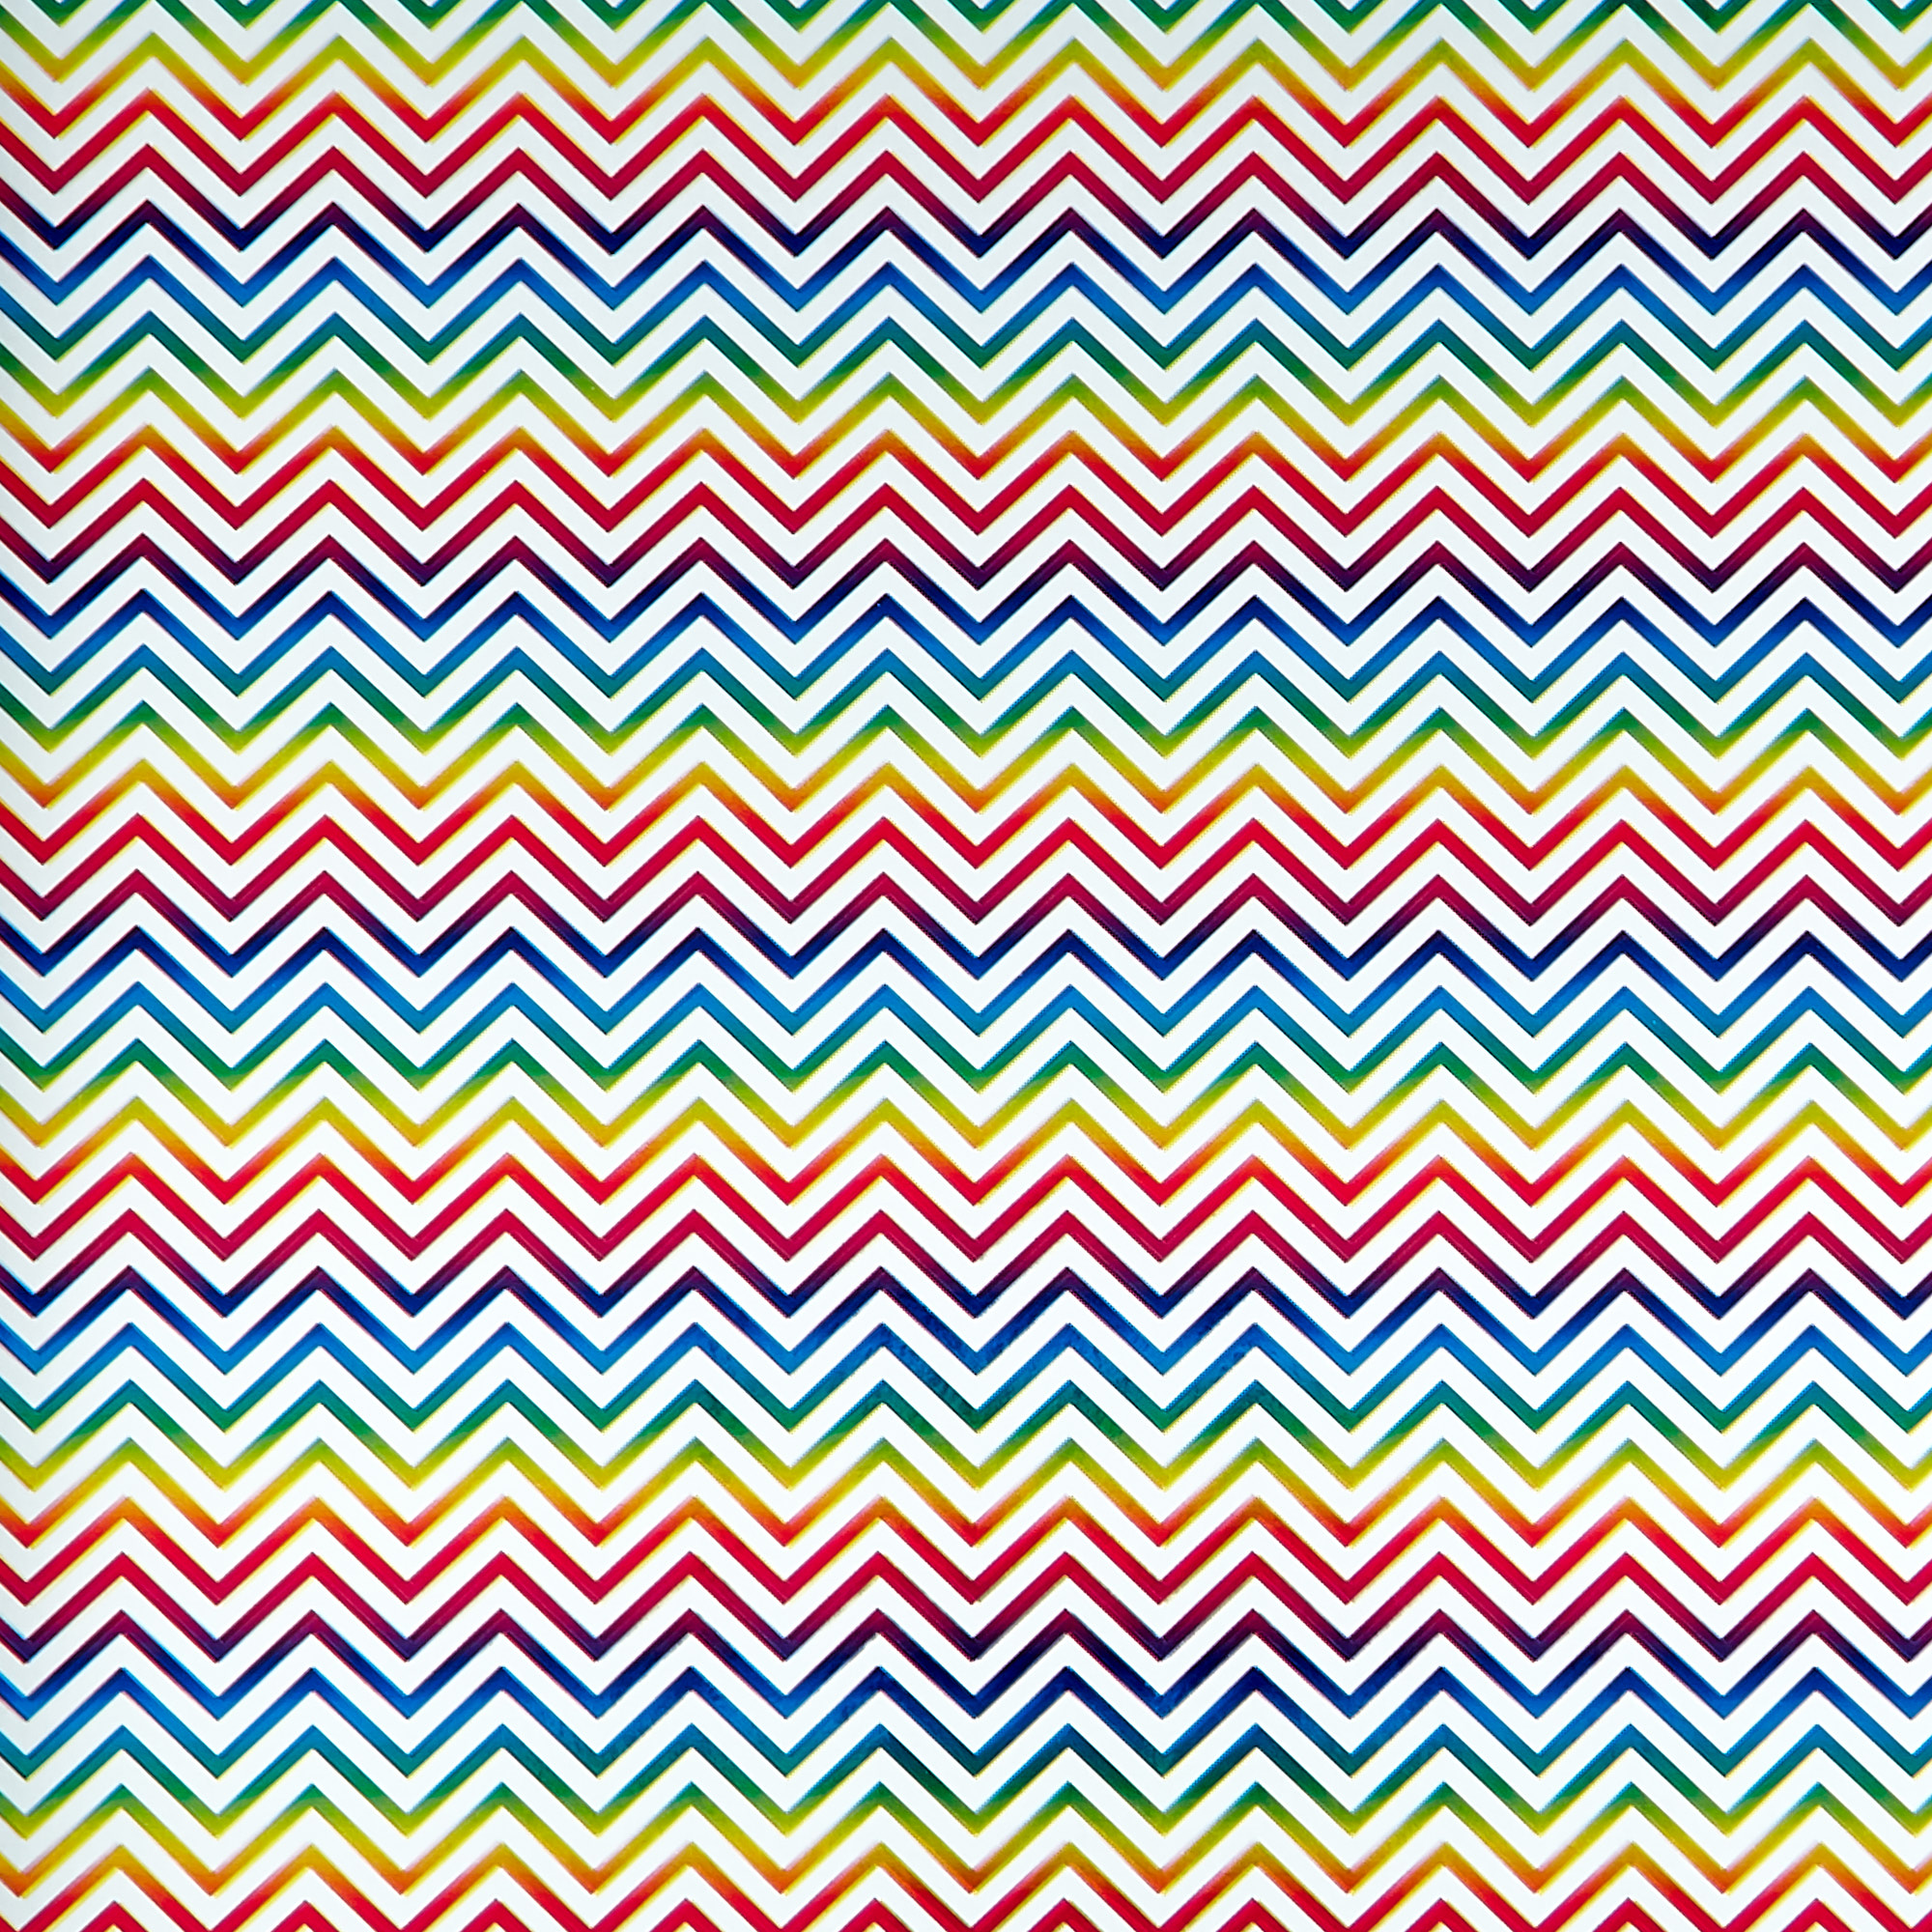 Rainbow Themed Wrapping Paper - 4 Rolls 